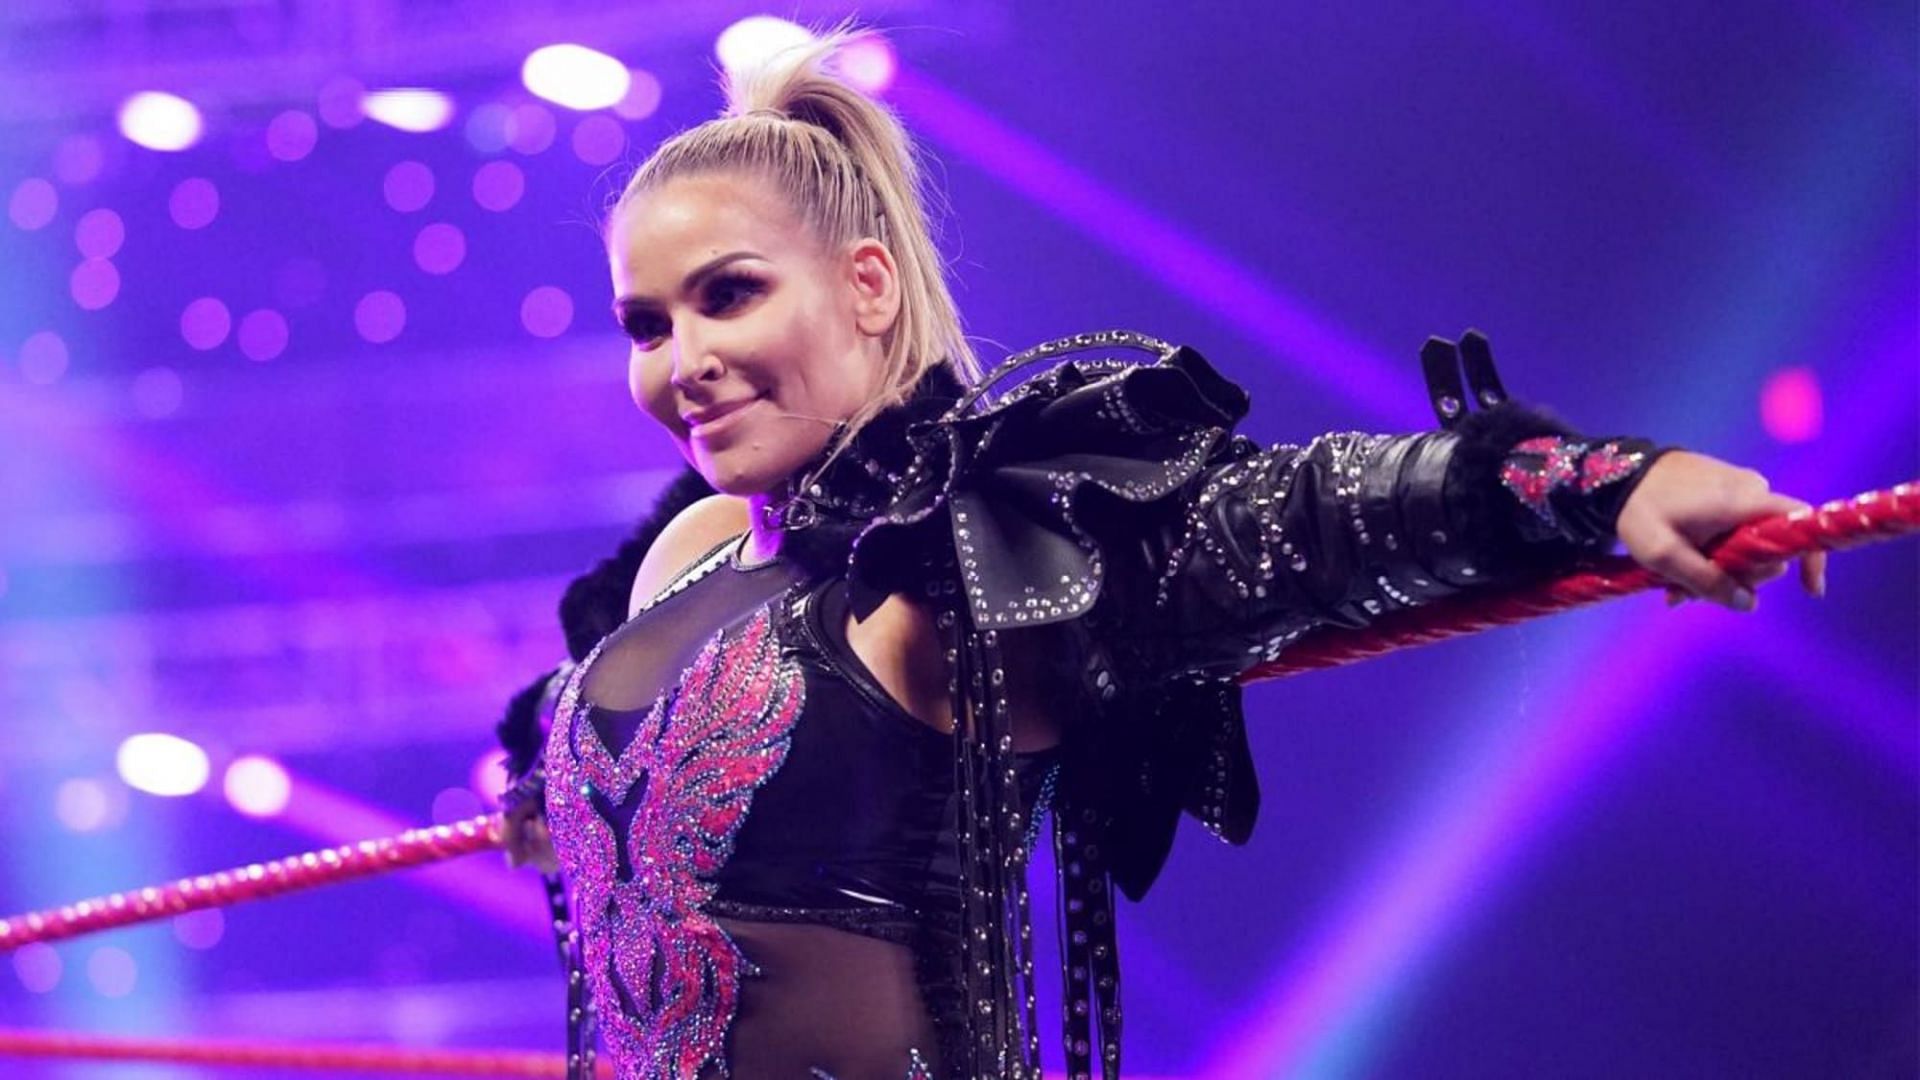 Natalya currently has no plans for WrestleMania 39